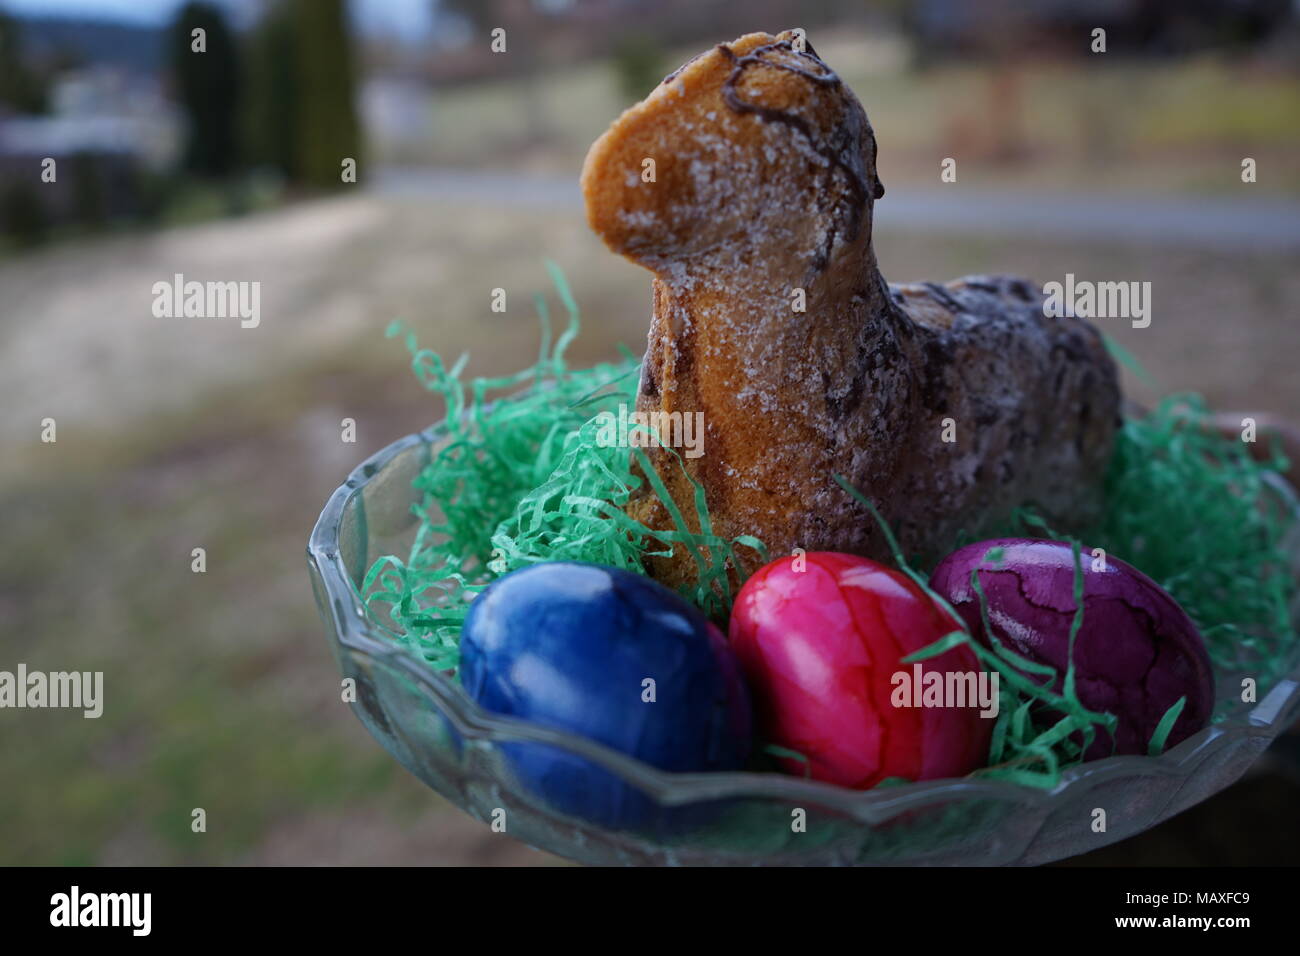 oestern egg and lamb Stock Photo